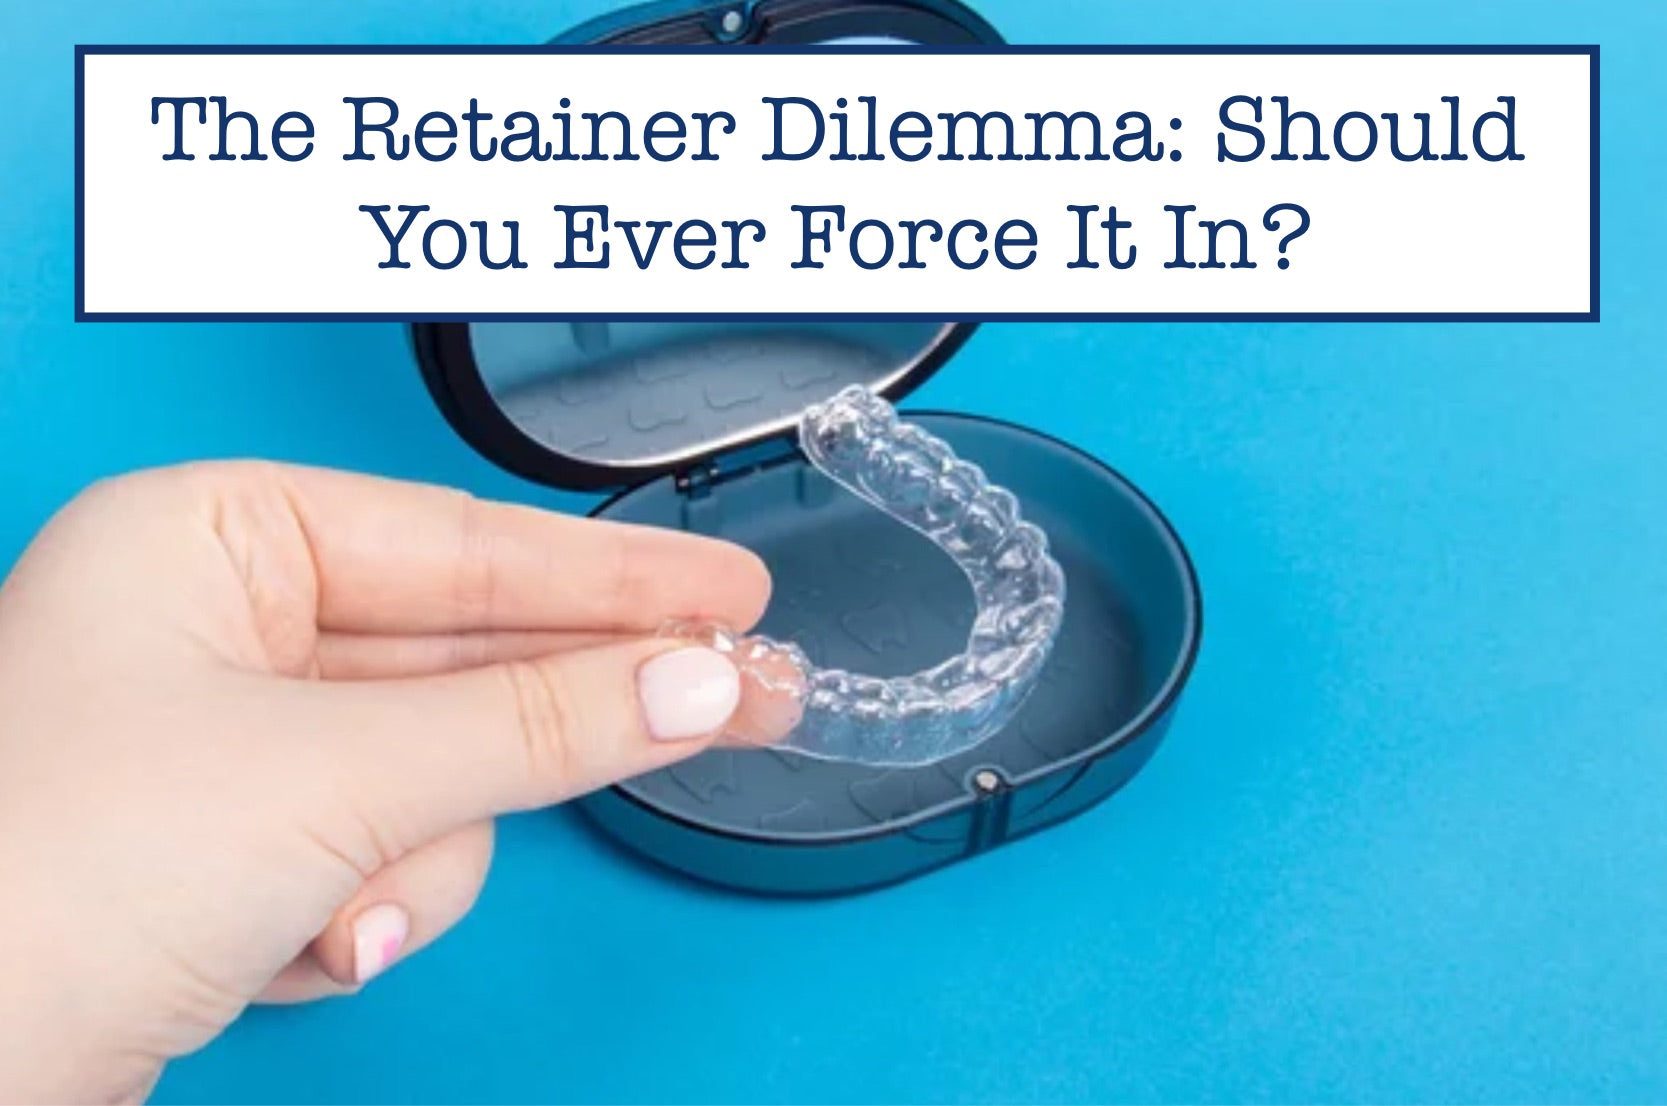 The Retainer Dilemma: Should You Ever Force It In?